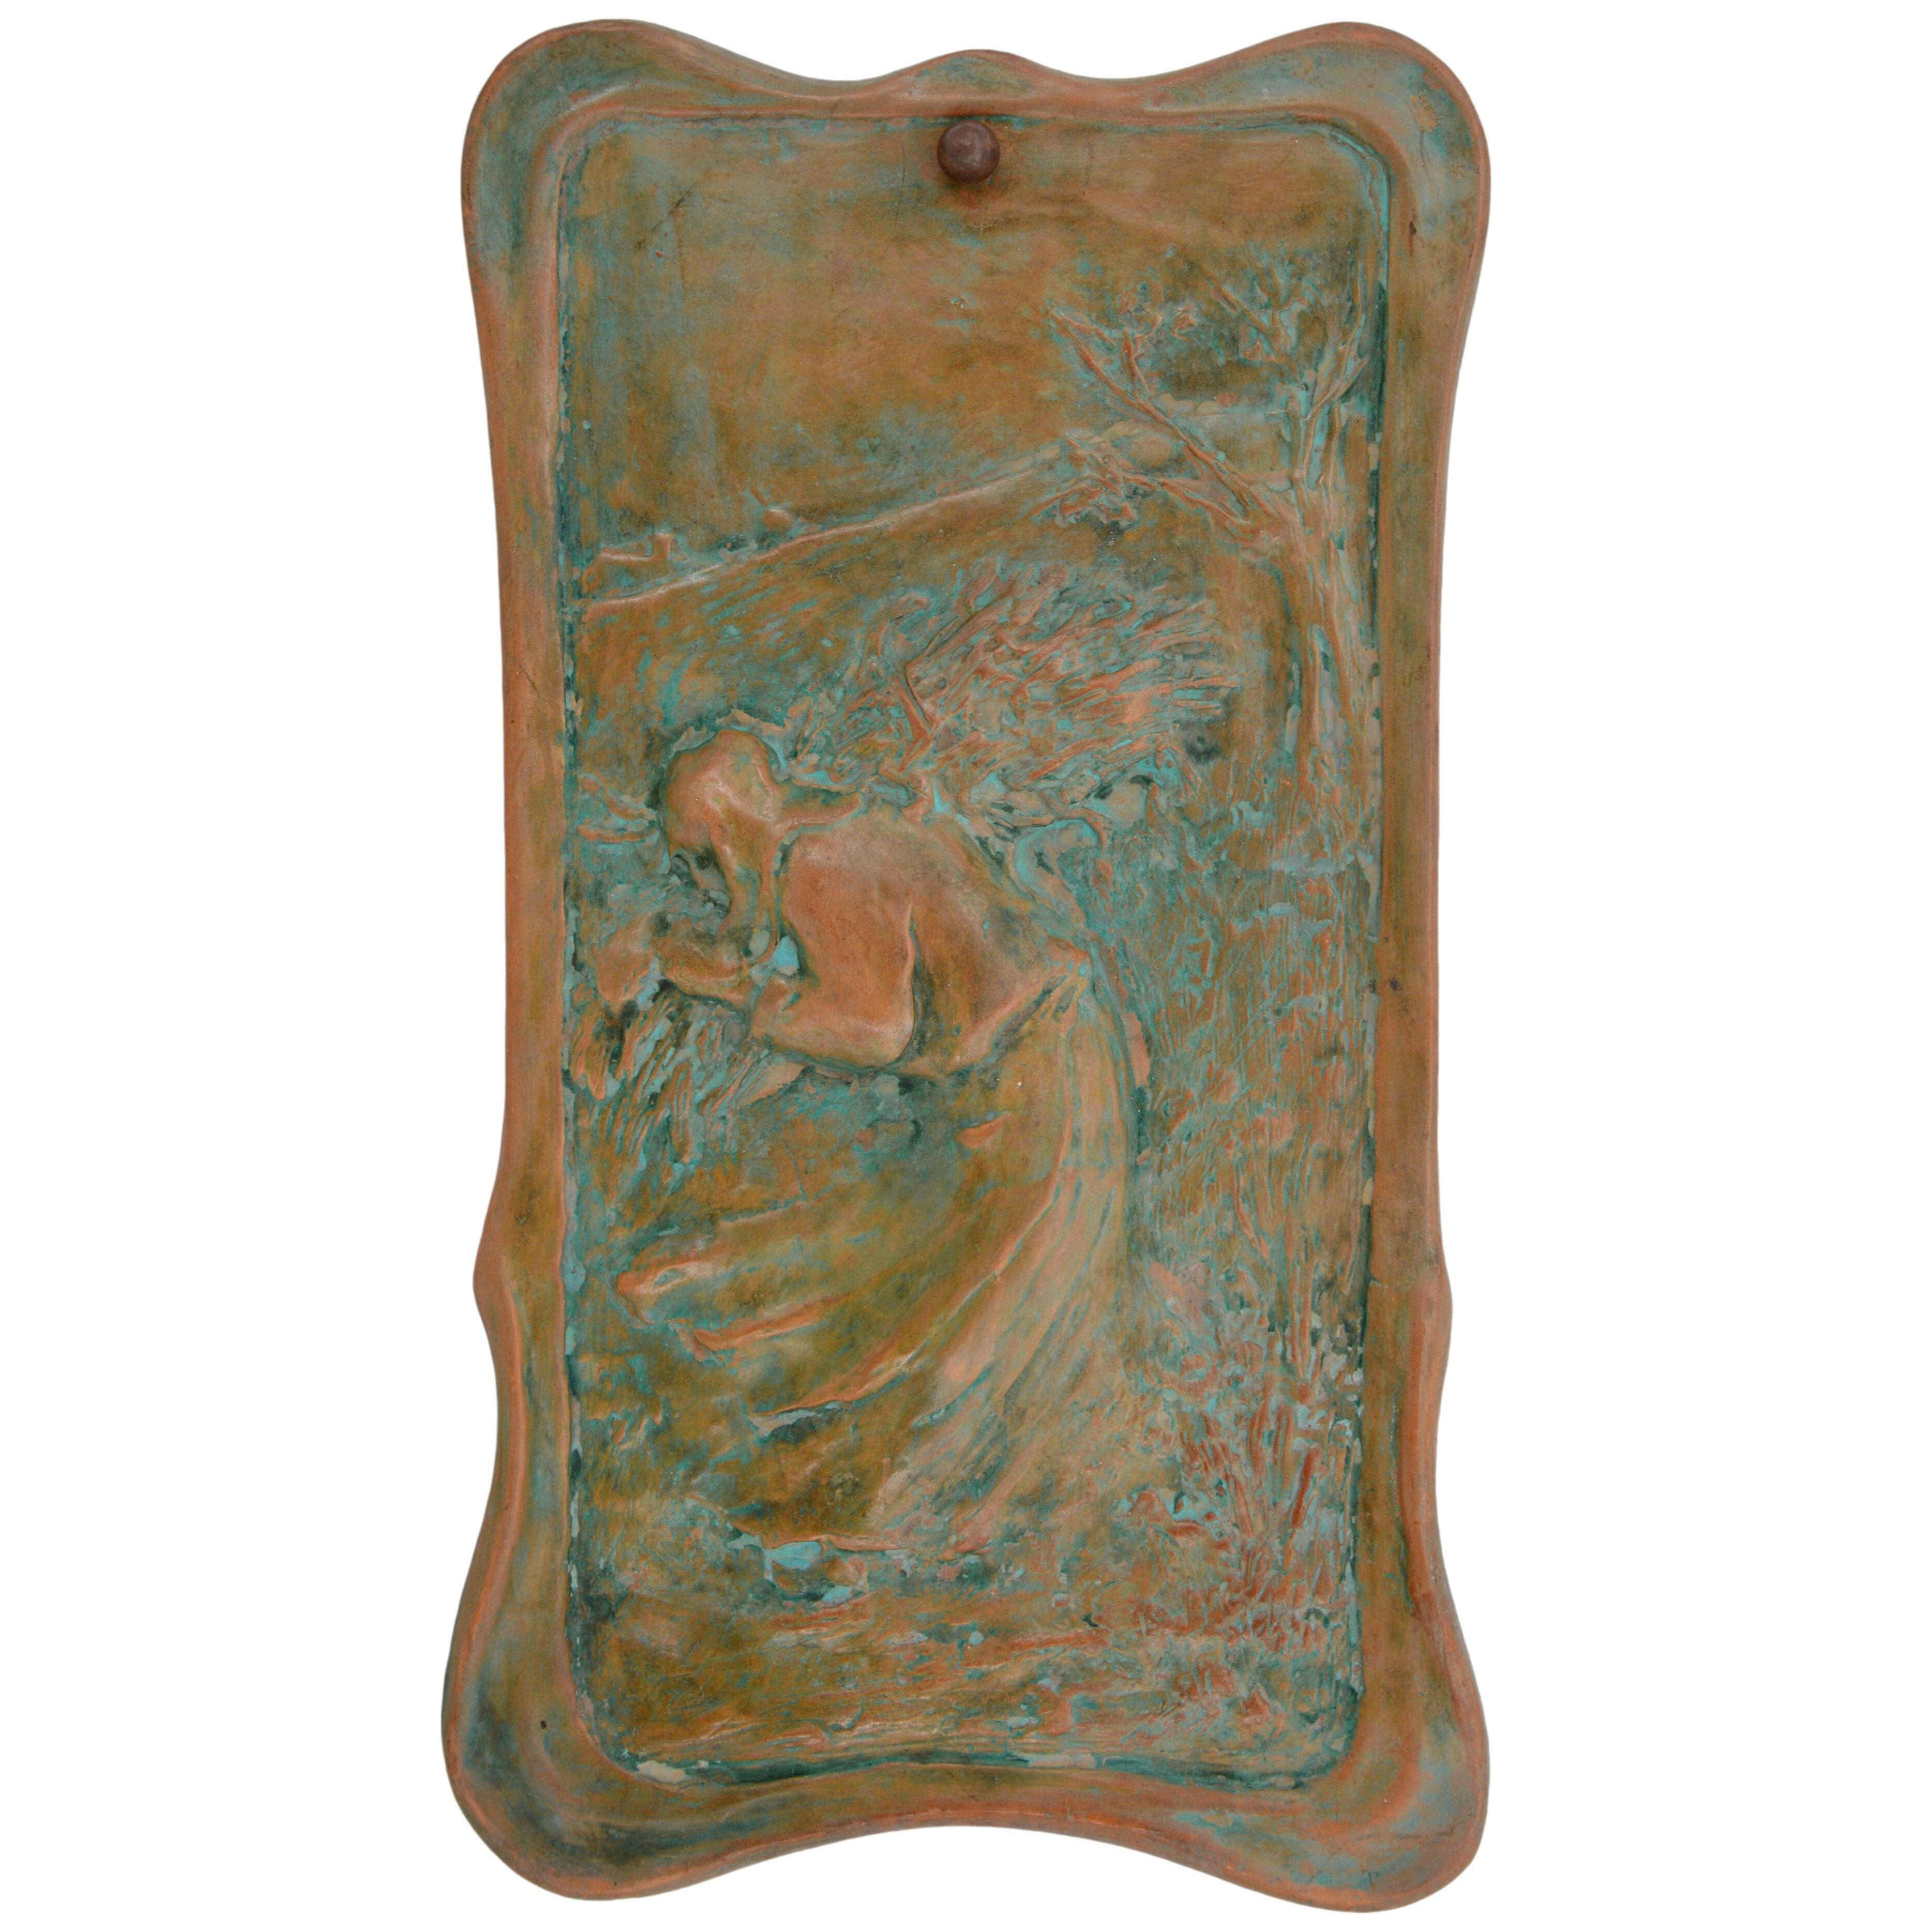 French Art Nouveau Terracotta Wall Plaque, Early 20th Century